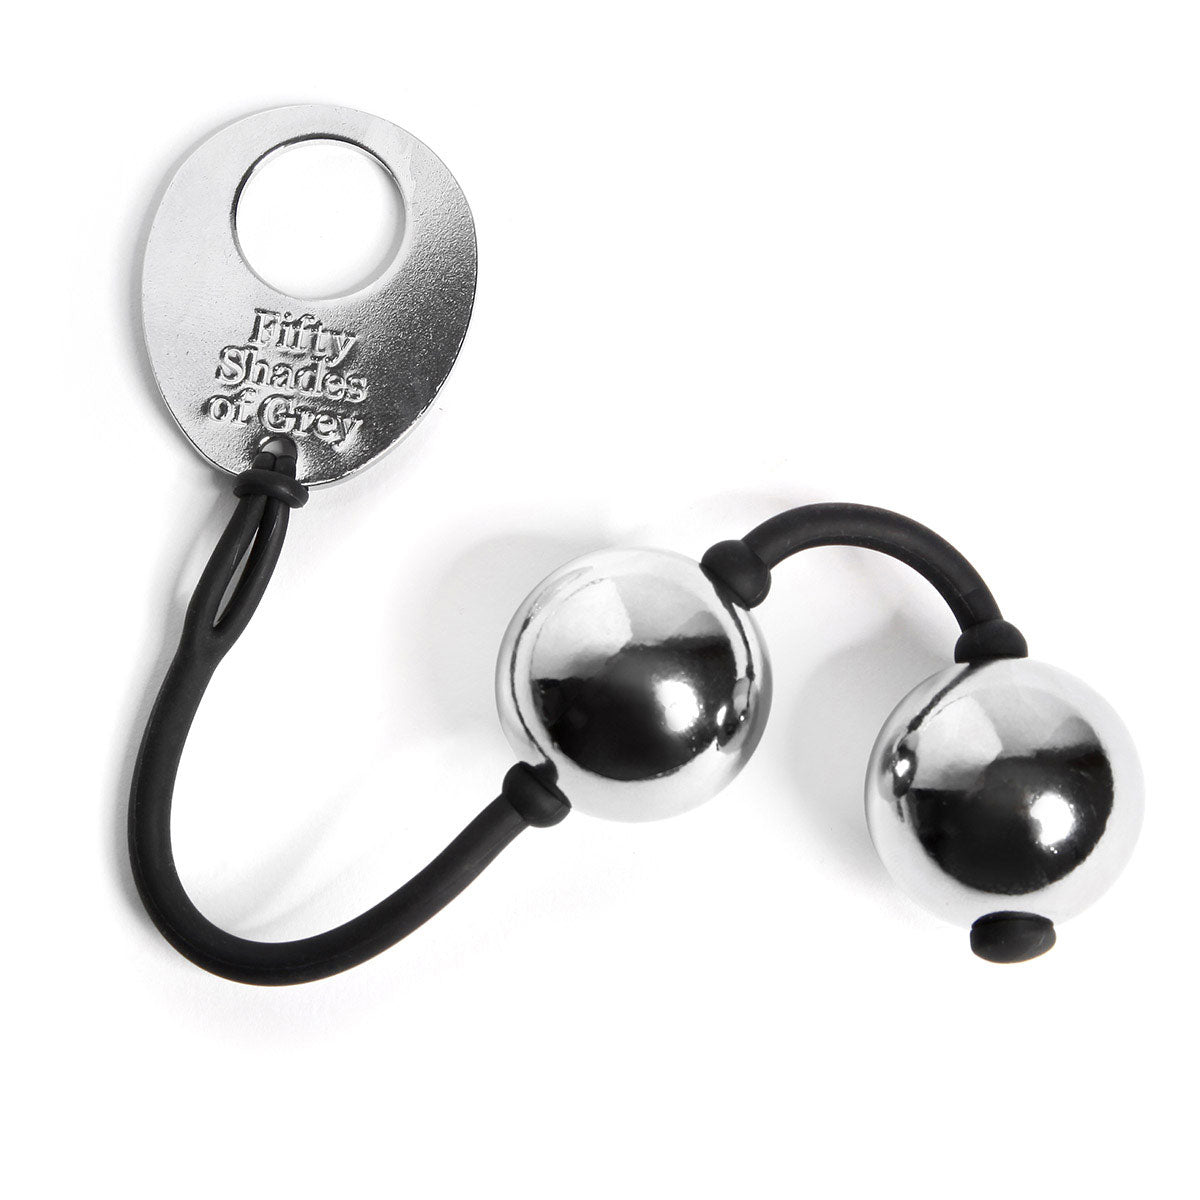 Fifty Shades - Inner Goddess Silver Metal Pleasure Balls Intimates Adult Boutique